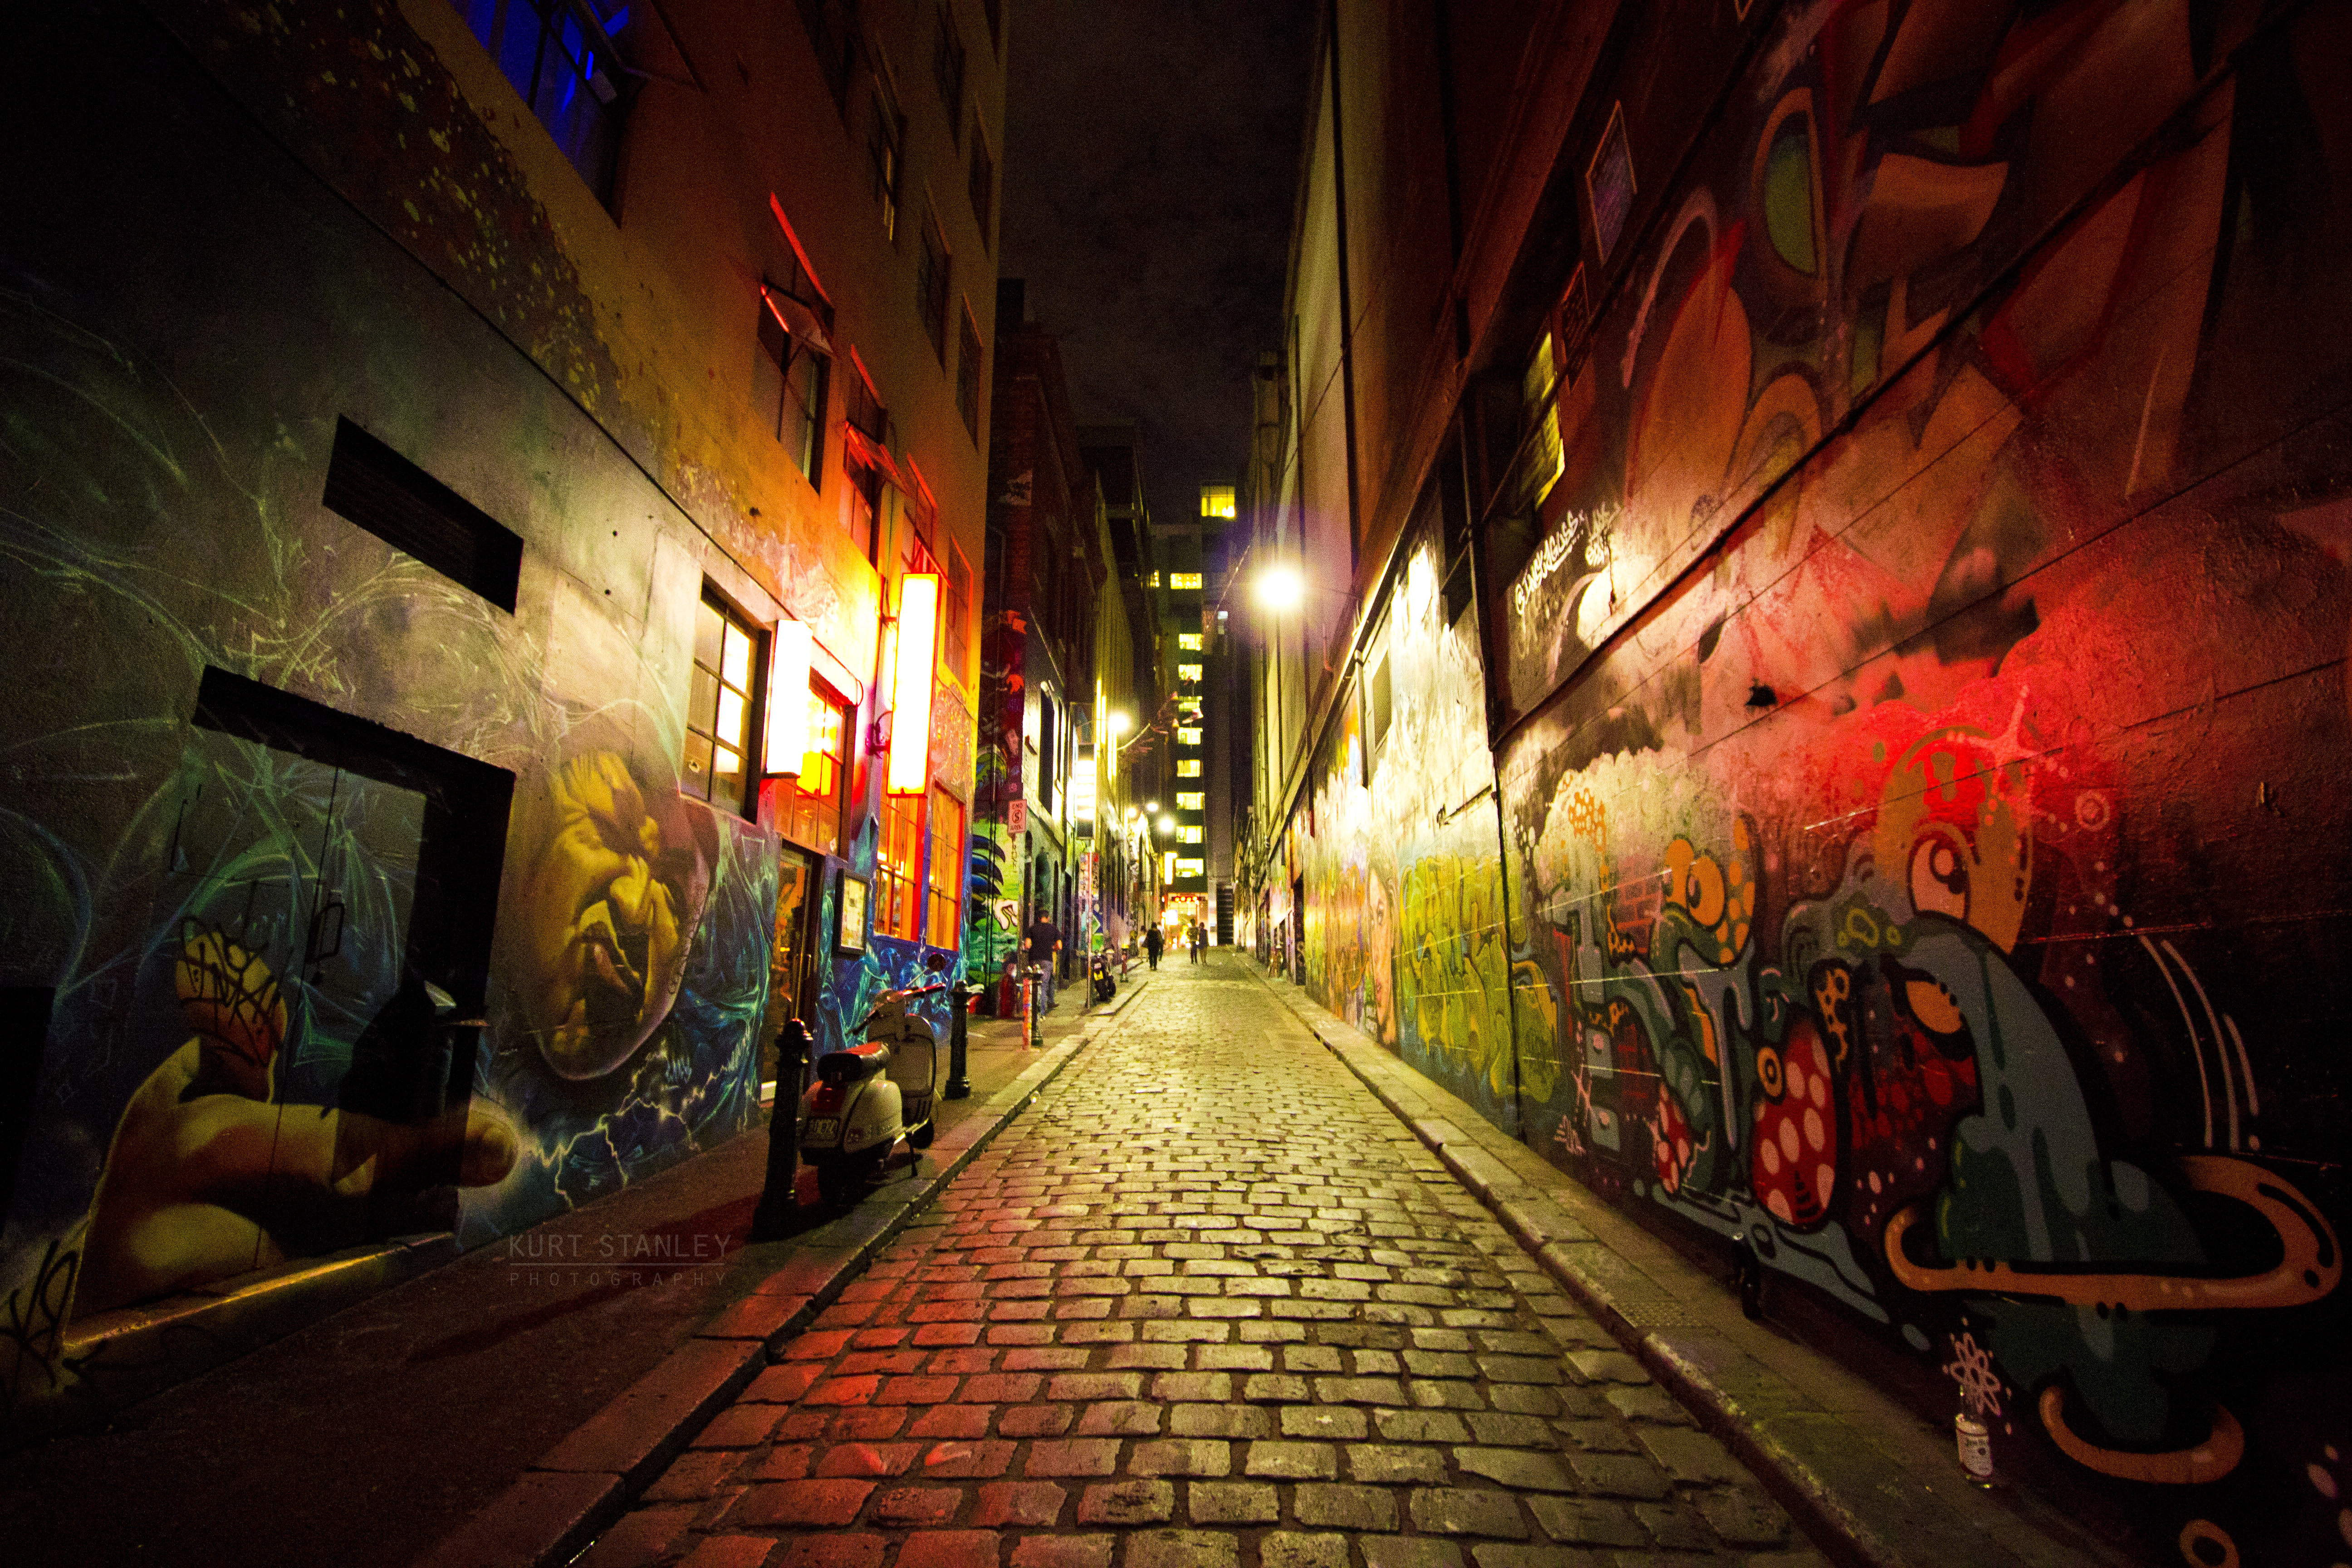 pre_1656421109__city-street-night-cobblestone-shadow-road-evening-graffiti-evil-australia-victoria-perspective-melbourne-art-light-color-mysterious-view-vibrant-point-alley-lighting-colour-darkness-scooter-doors-lane-haunting-forebo.jpg